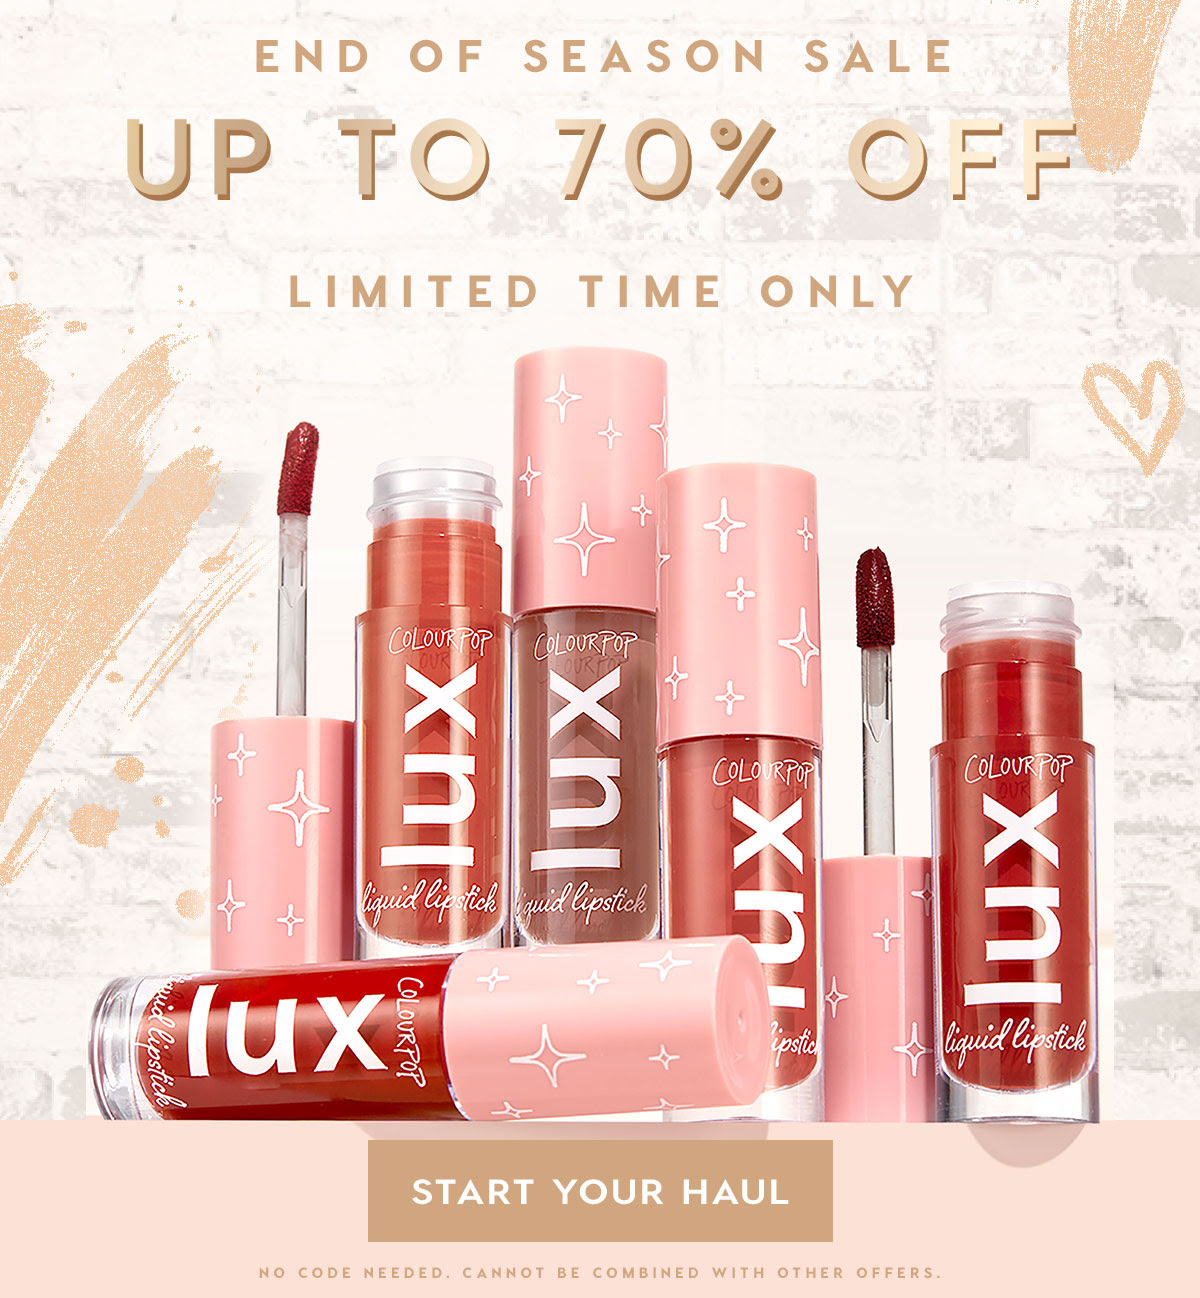 Up to 70% off Winter Sale at ColourPop